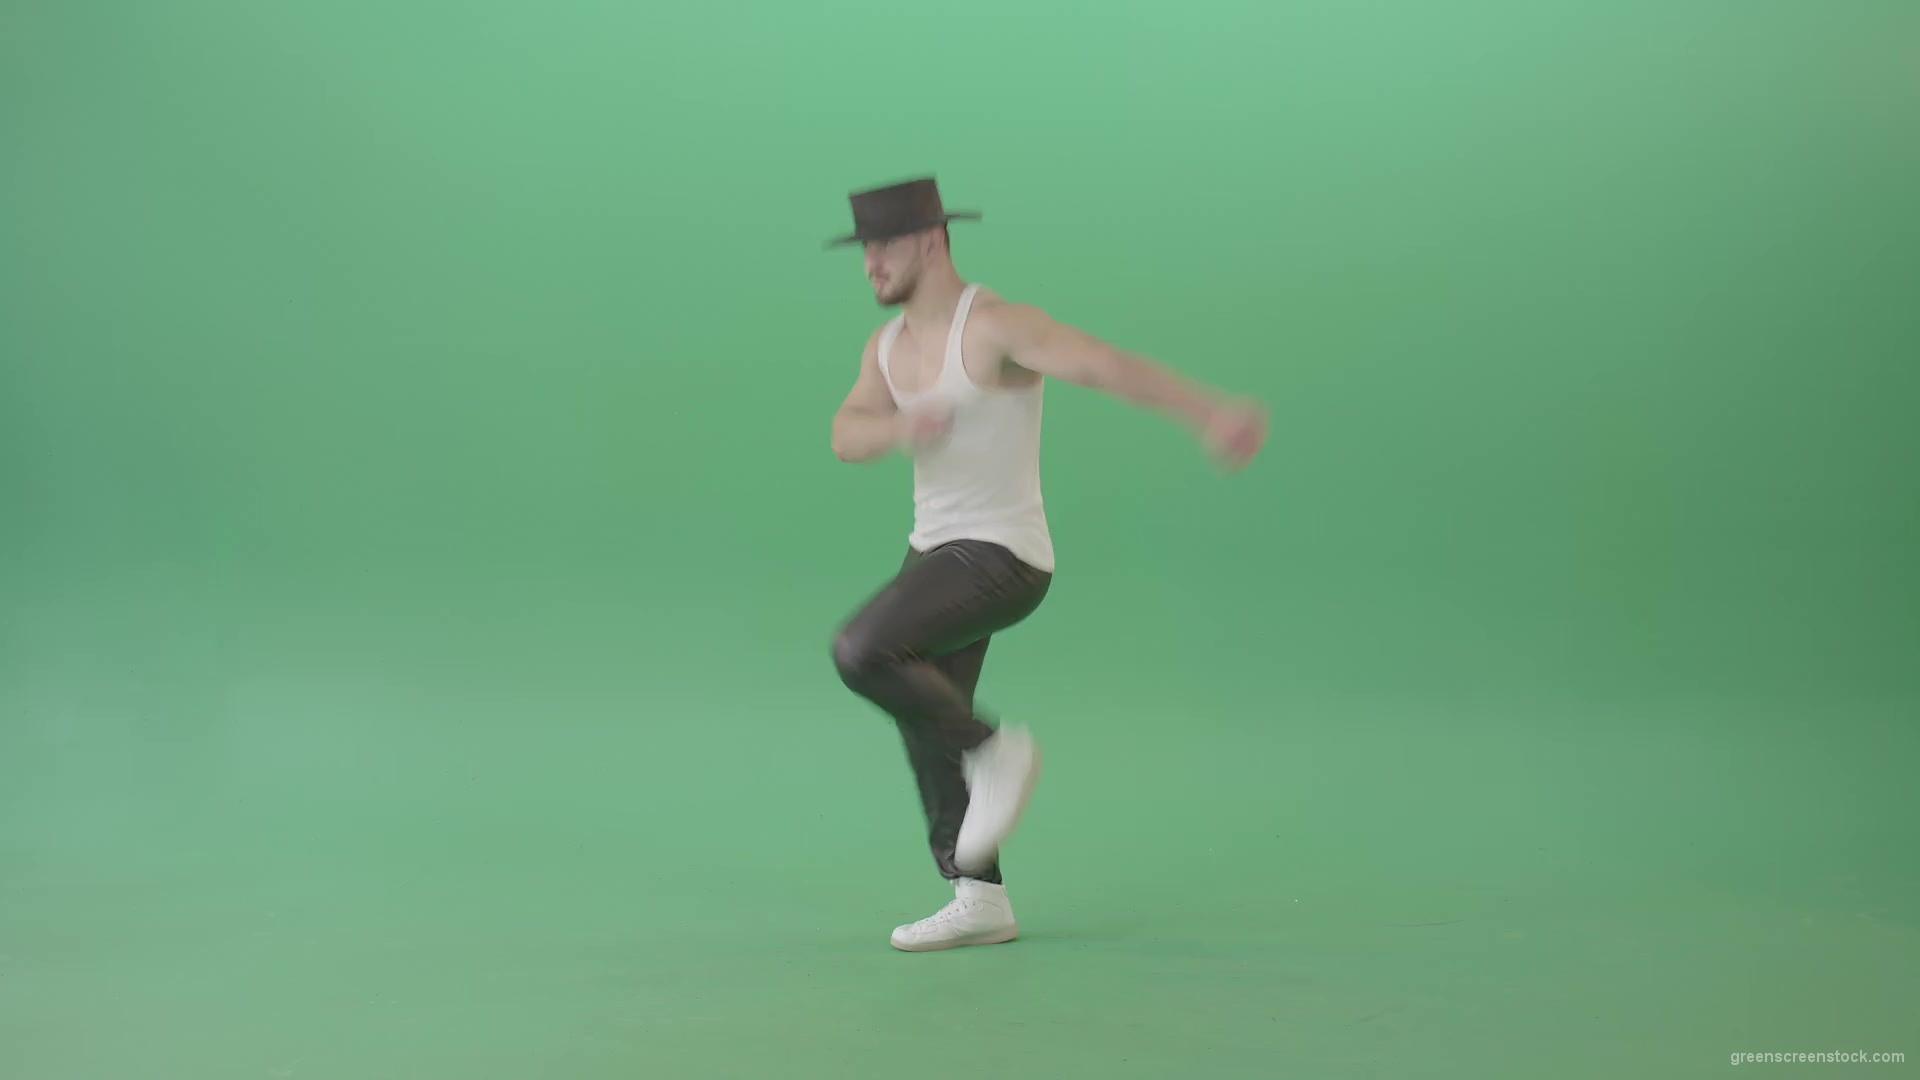 Sport-Man-in-black-hat-dancing-and-marching-fast-isolated-over-Green-Screen-4K-Video-Footage-1920_002 Green Screen Stock